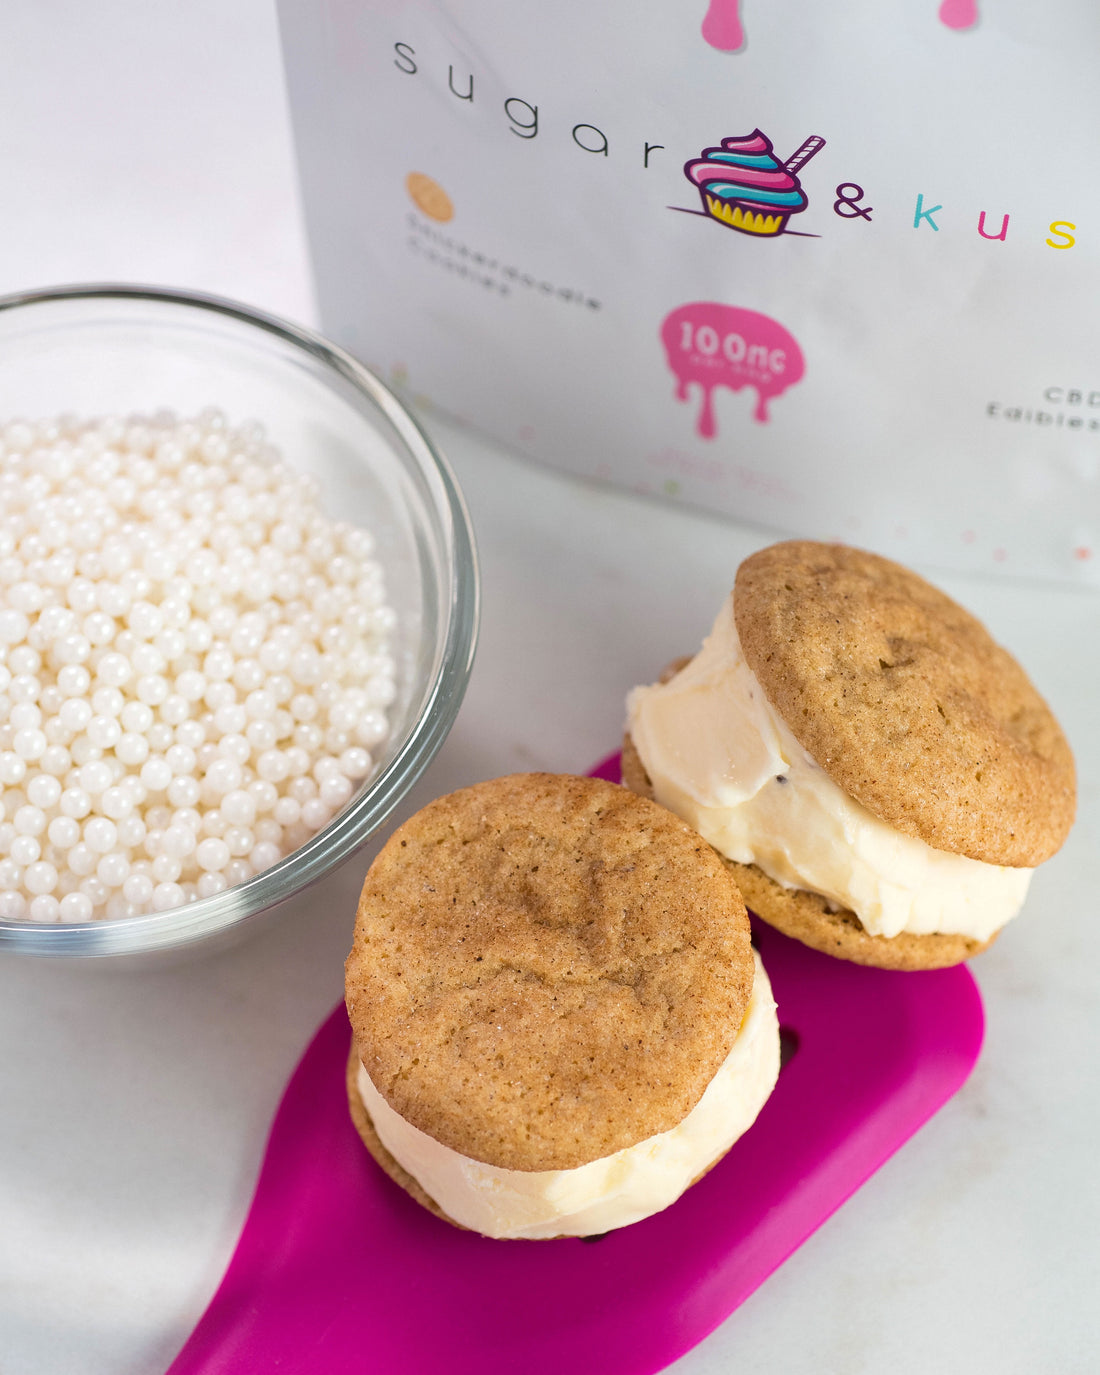 Looking for a sweet Hemp recipe? This recipe is easy to make and helps you to get the maximum benefits of Hemp by adding Vanilla Hemp Oil to our Snickerdoodle Hemp Cookies with a touch of ice cream to cool off on a hot day!